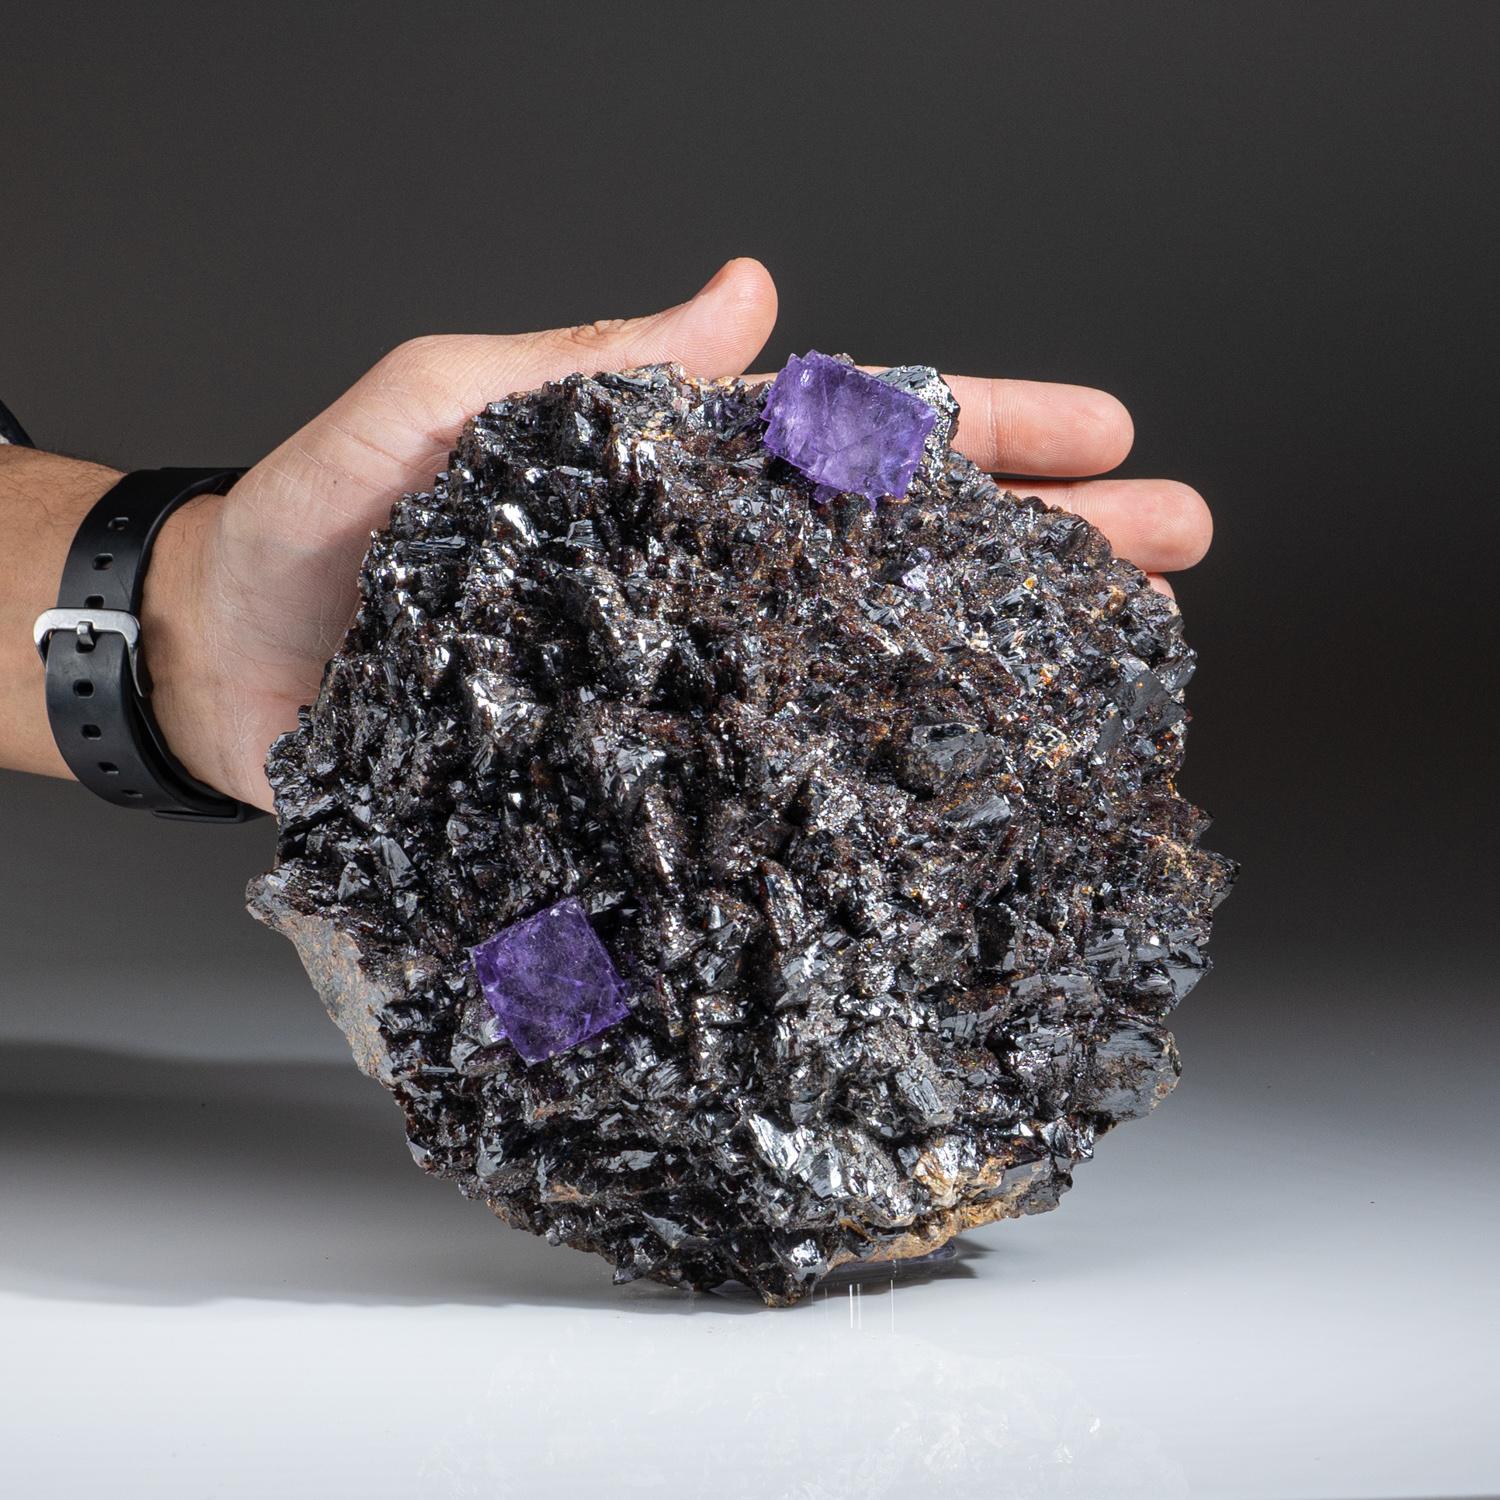  from Elmwood Mine, Carthage, Smith County, Tennessee

Transparent 3d cubic transparent purple fluorite crystals overgrown atop a cluster of metallic lustrous sphalerite crystals. The fluorite has rich purple transparent core with well defined faces